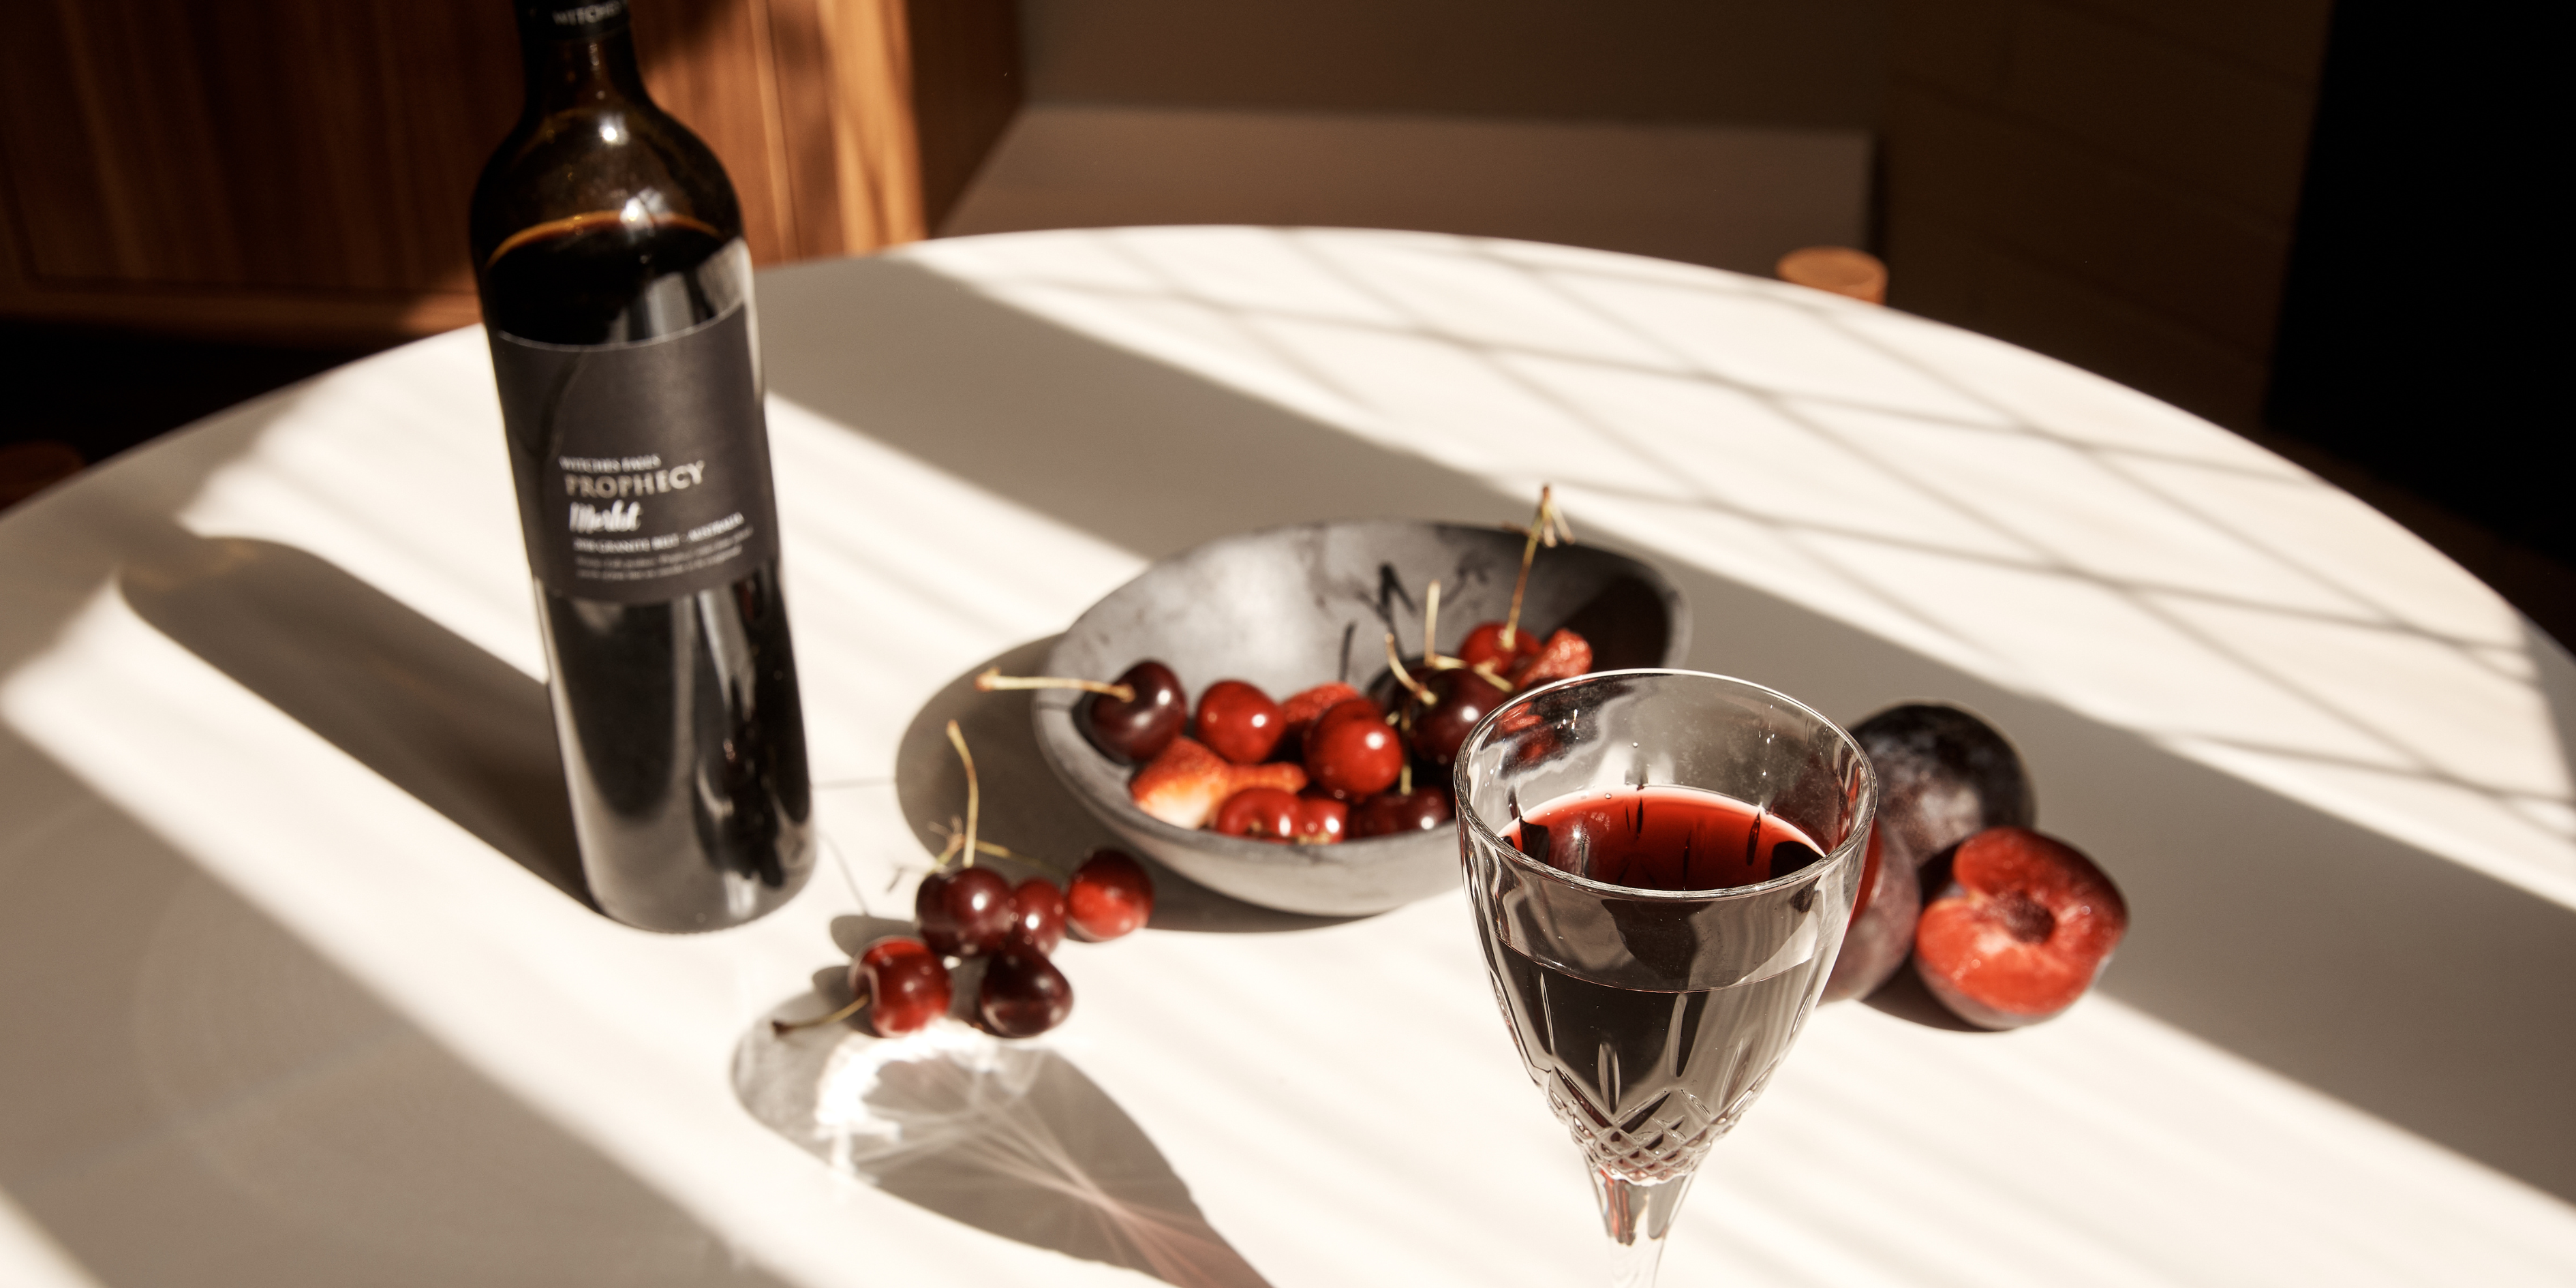 A bottle of Witches Falls Prophecy Merlot on a round table with a glass of red wine, and a bowl of red cherries and plums